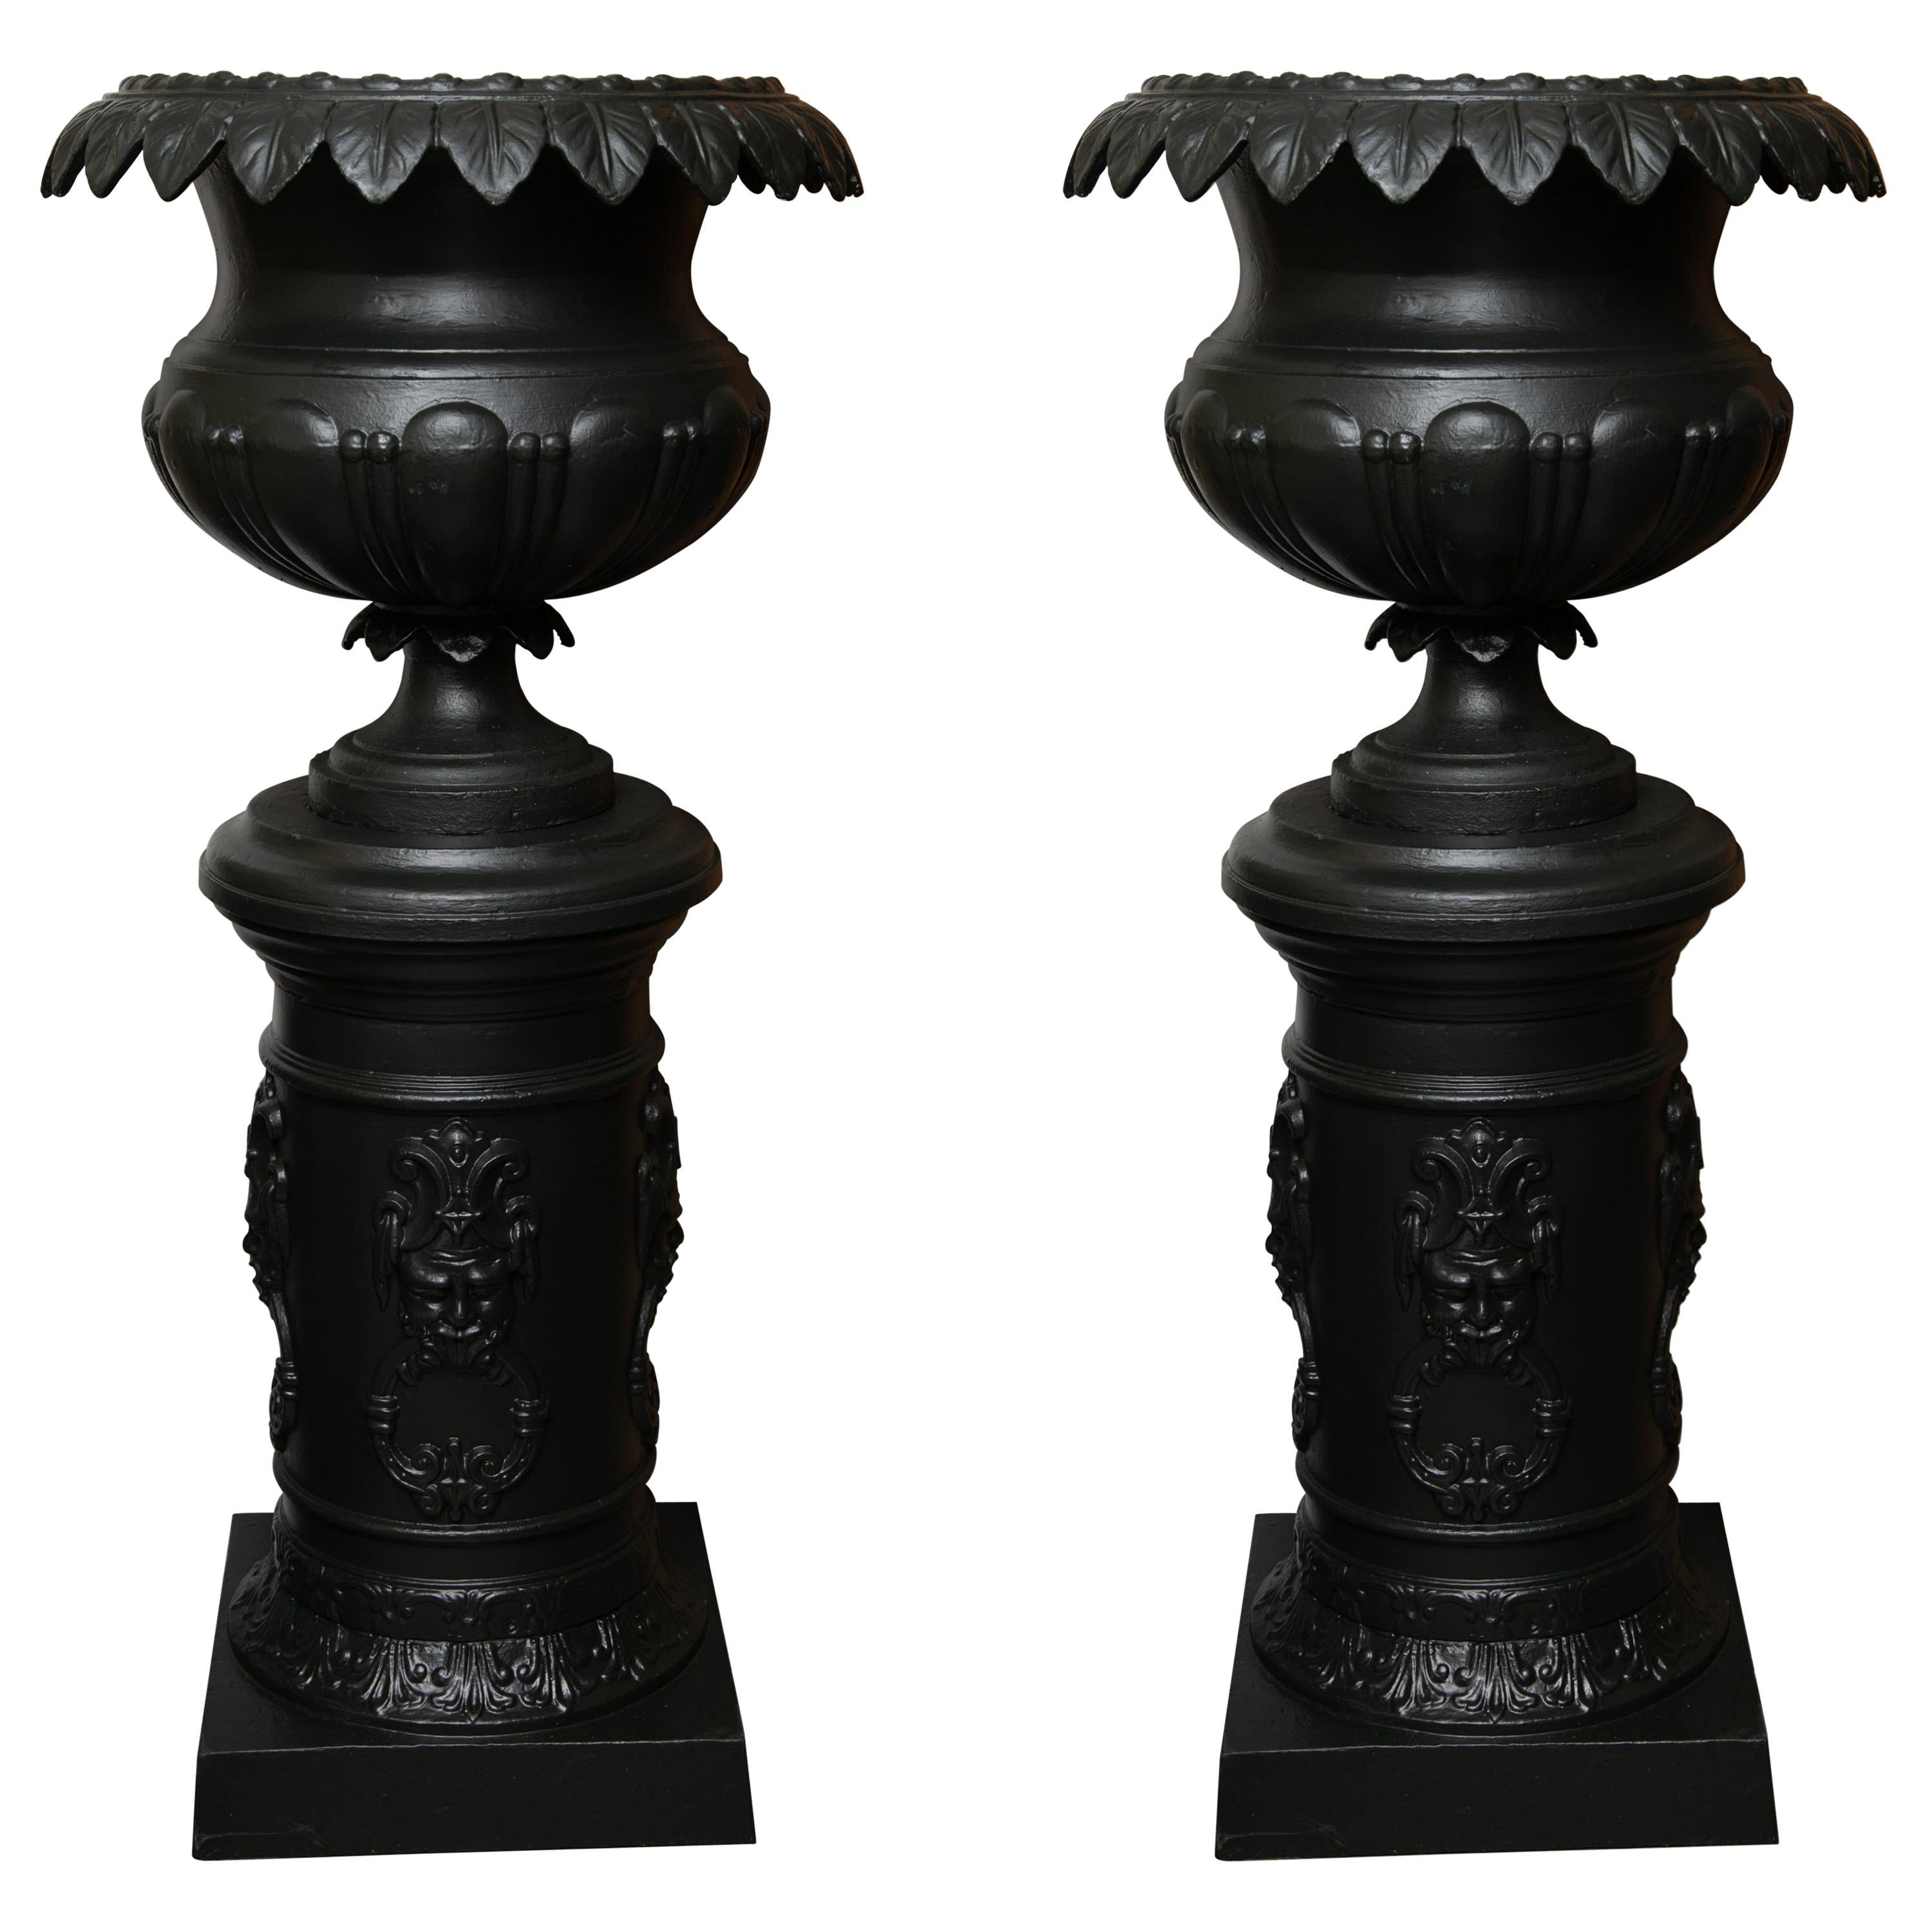 Late 19th Century Pair of Victorian Cast Iron Urns on Pedestals - Pair. 